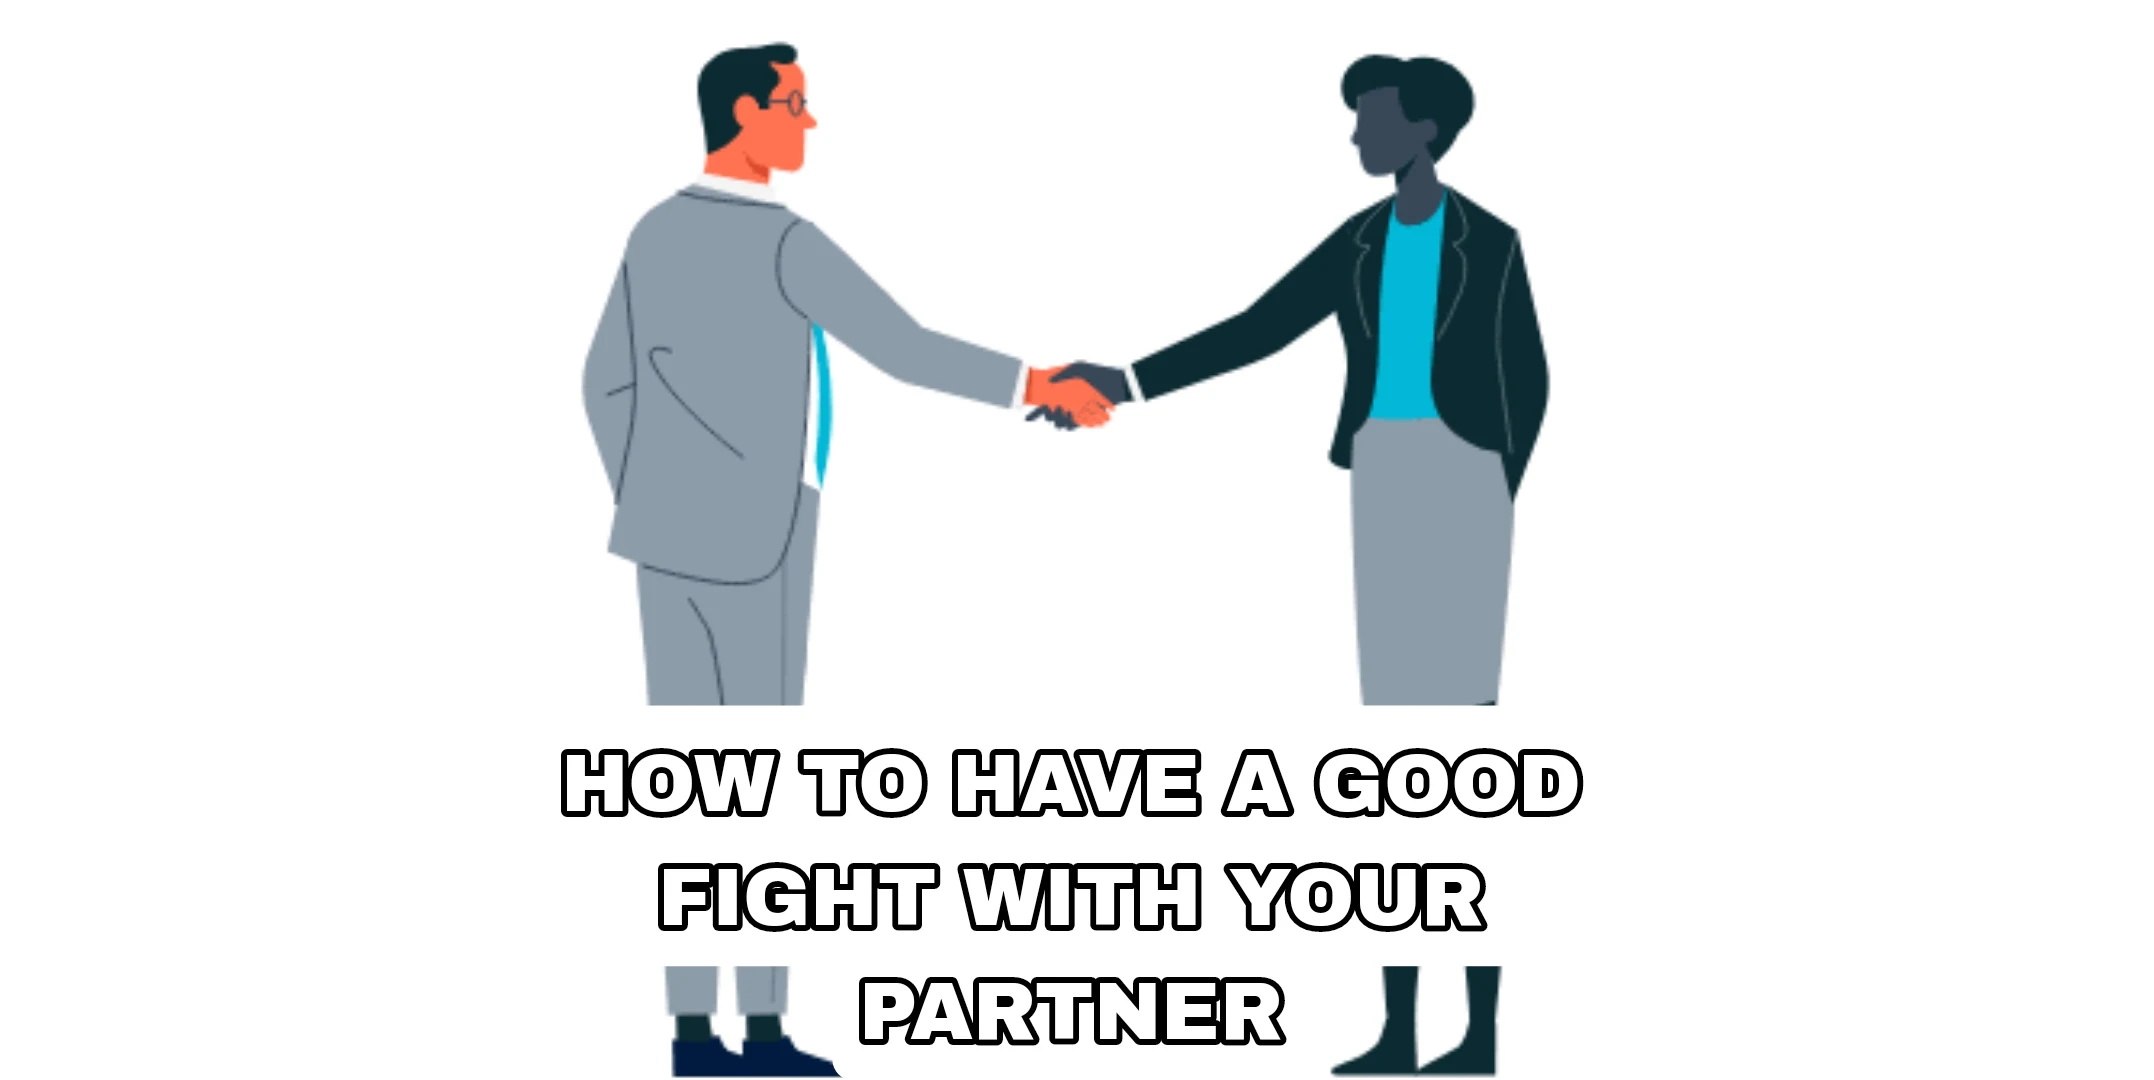 How to Have a ‘Good’ Fight With Your Partner